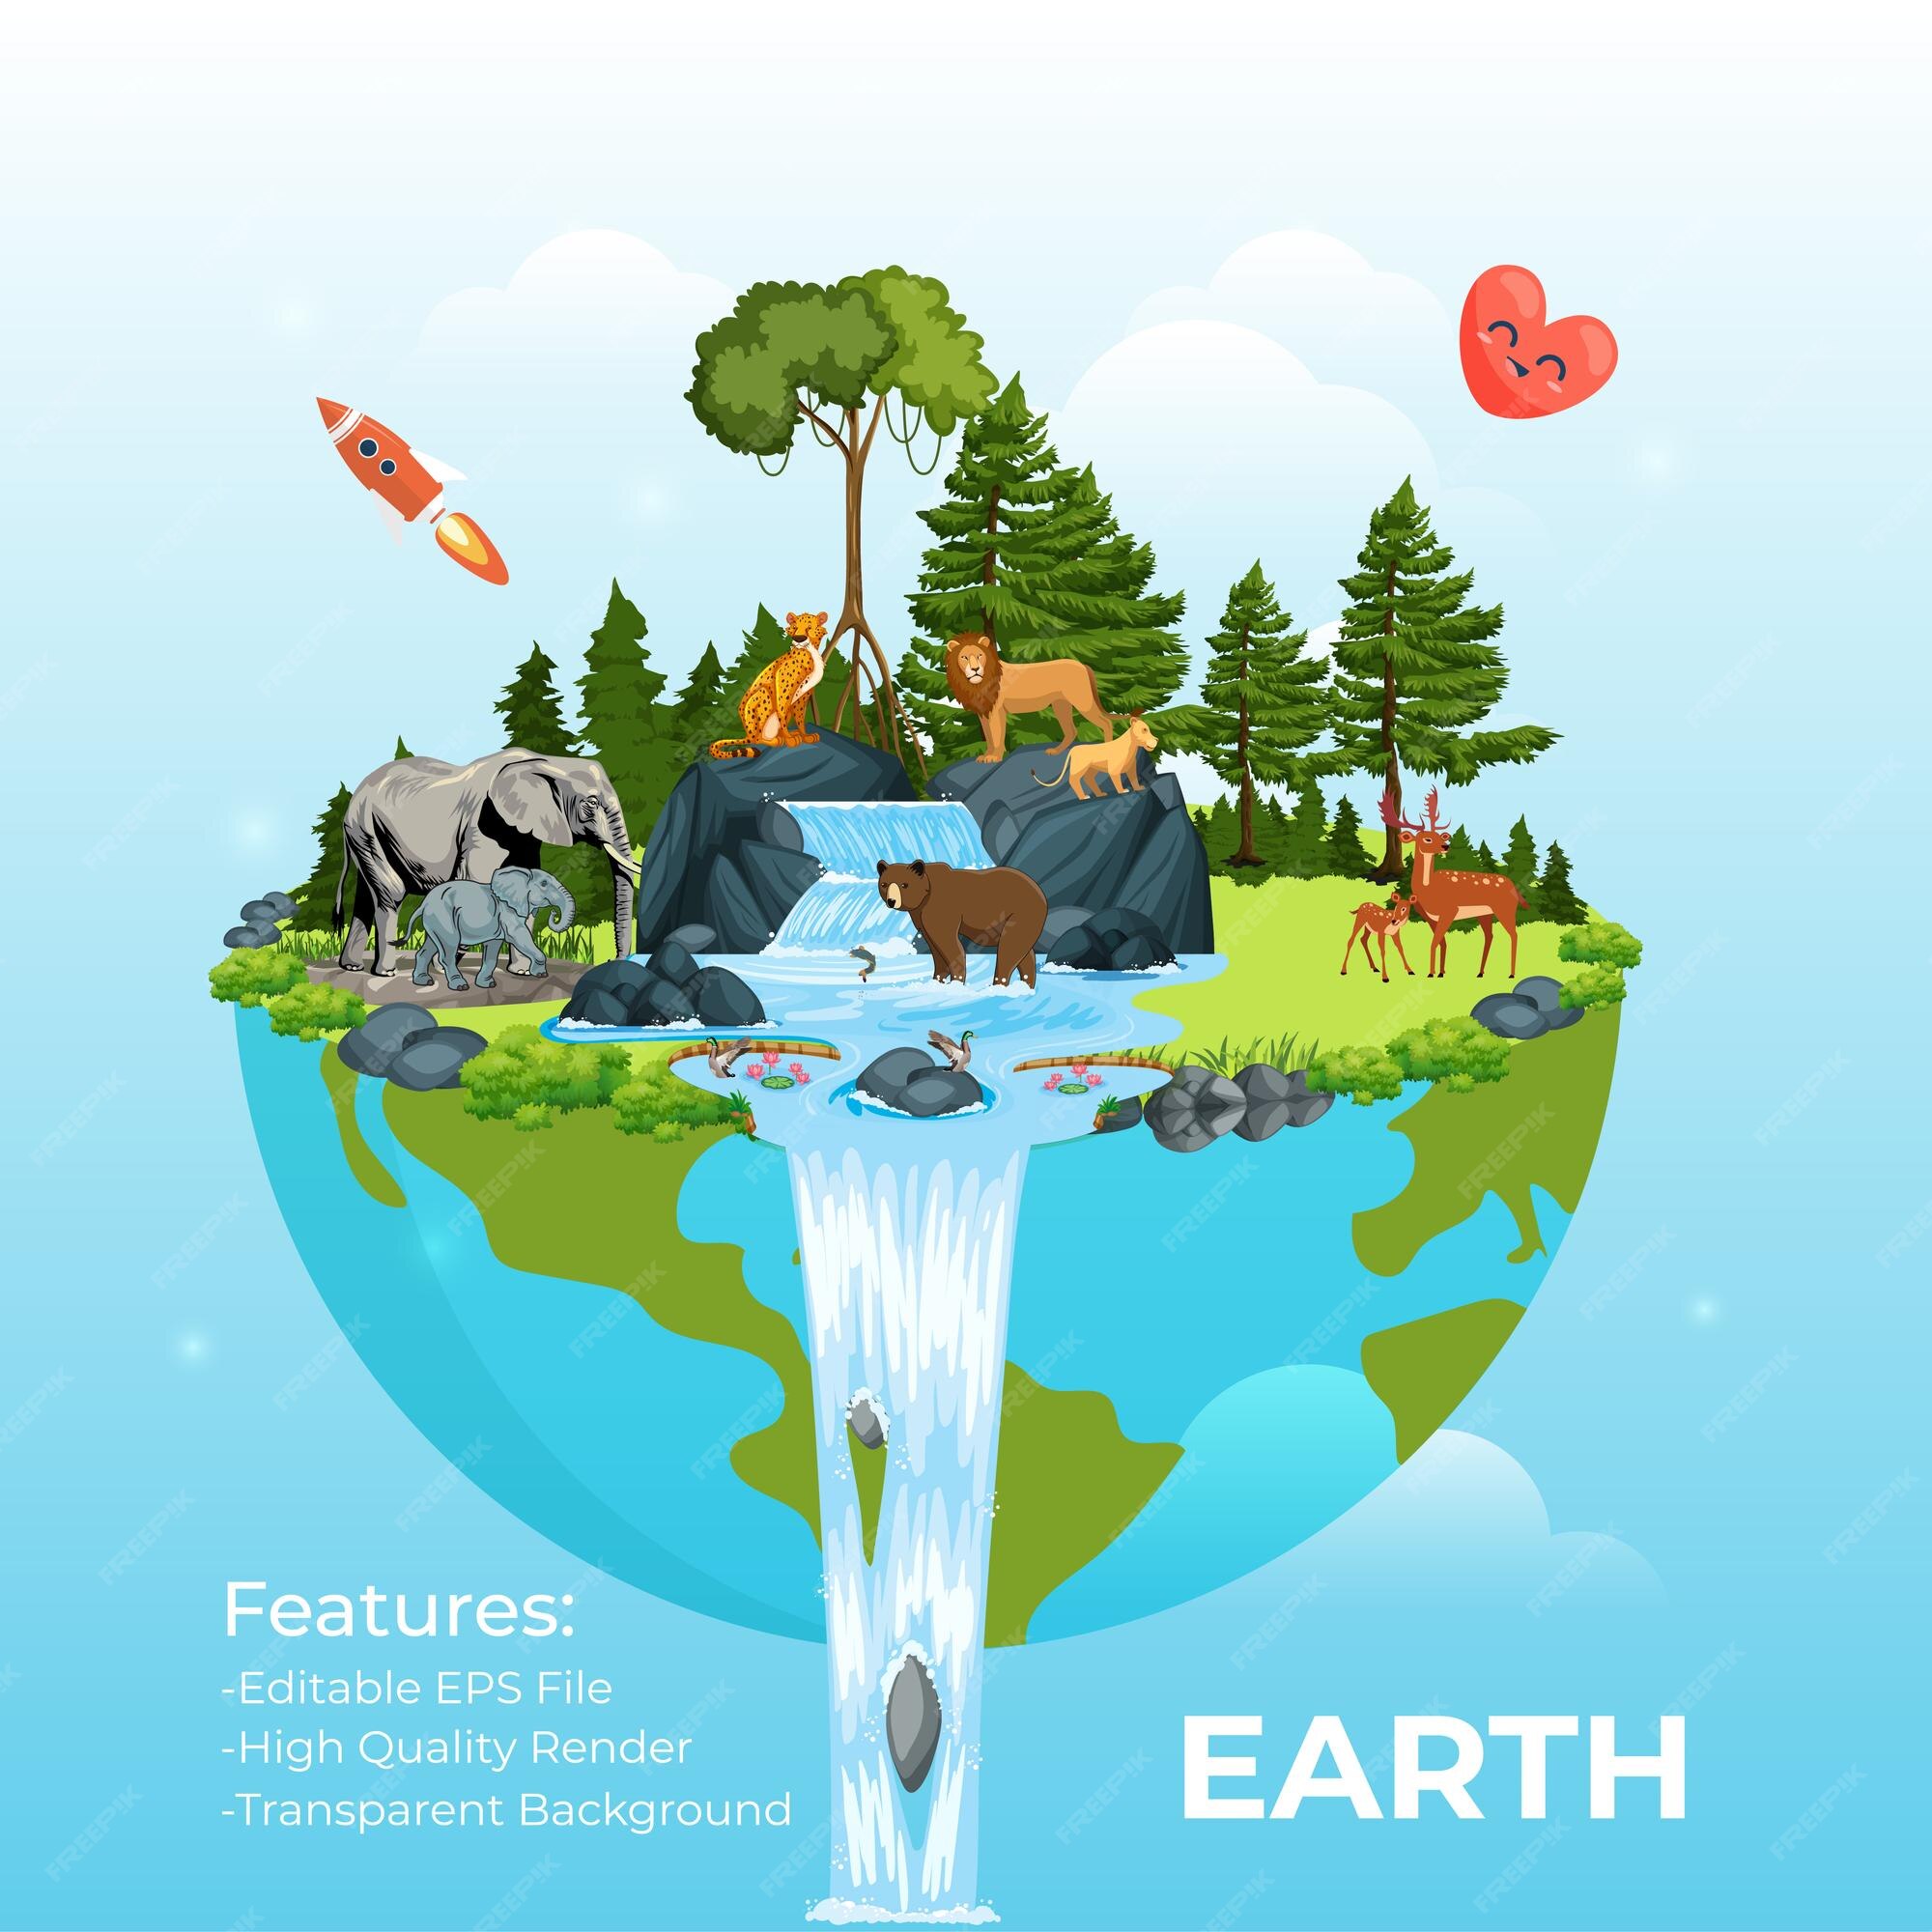 Premium Vector | Lovely planet earth with cartoon style